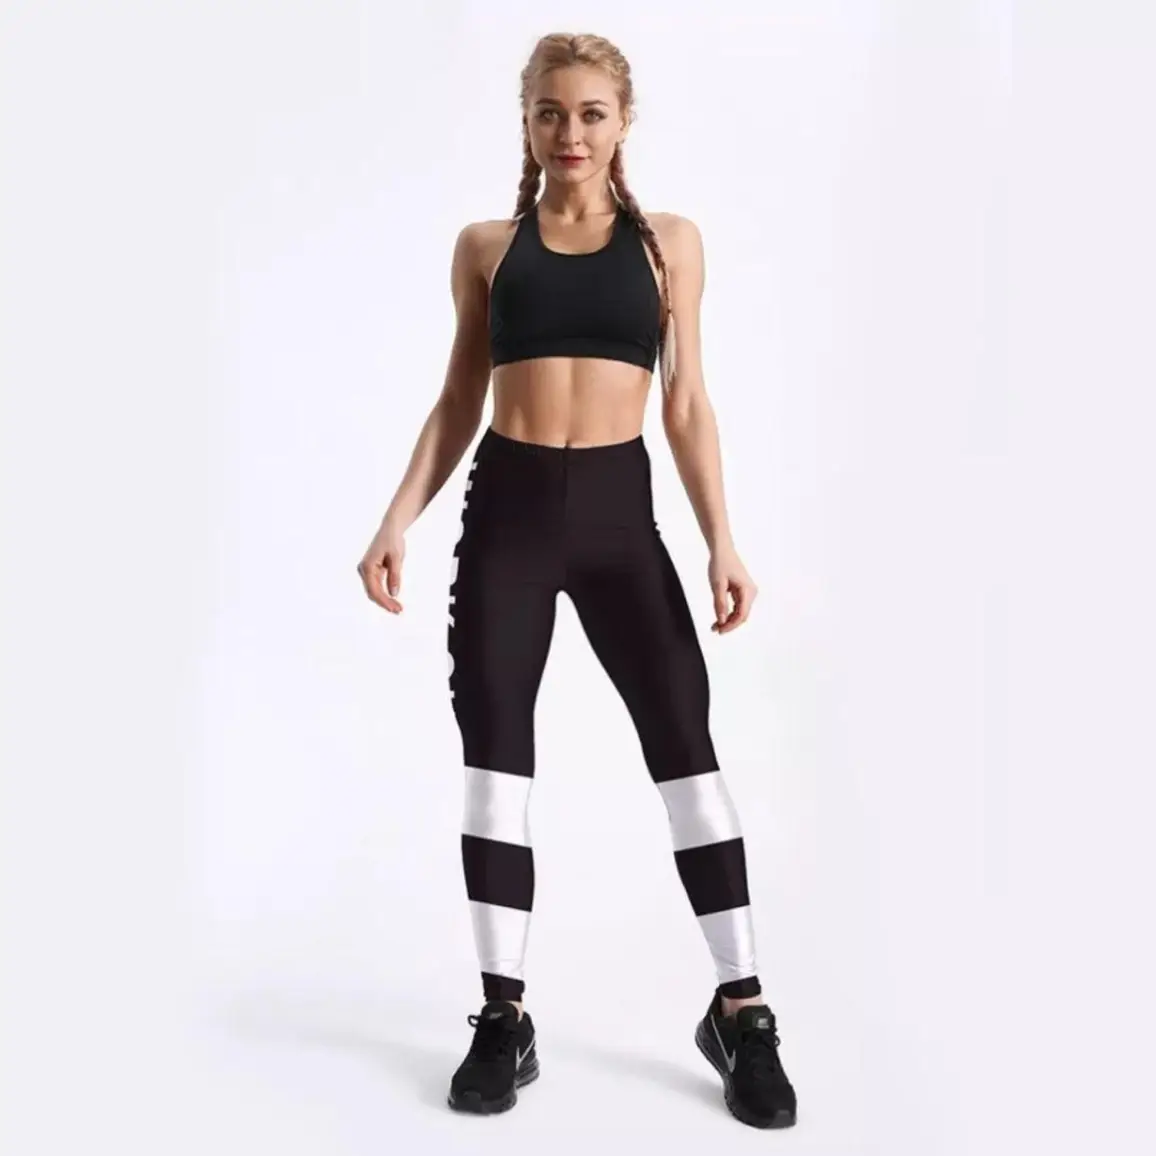 CURVY GIRL FITNESS SUPPLIES AND INSPIRATION